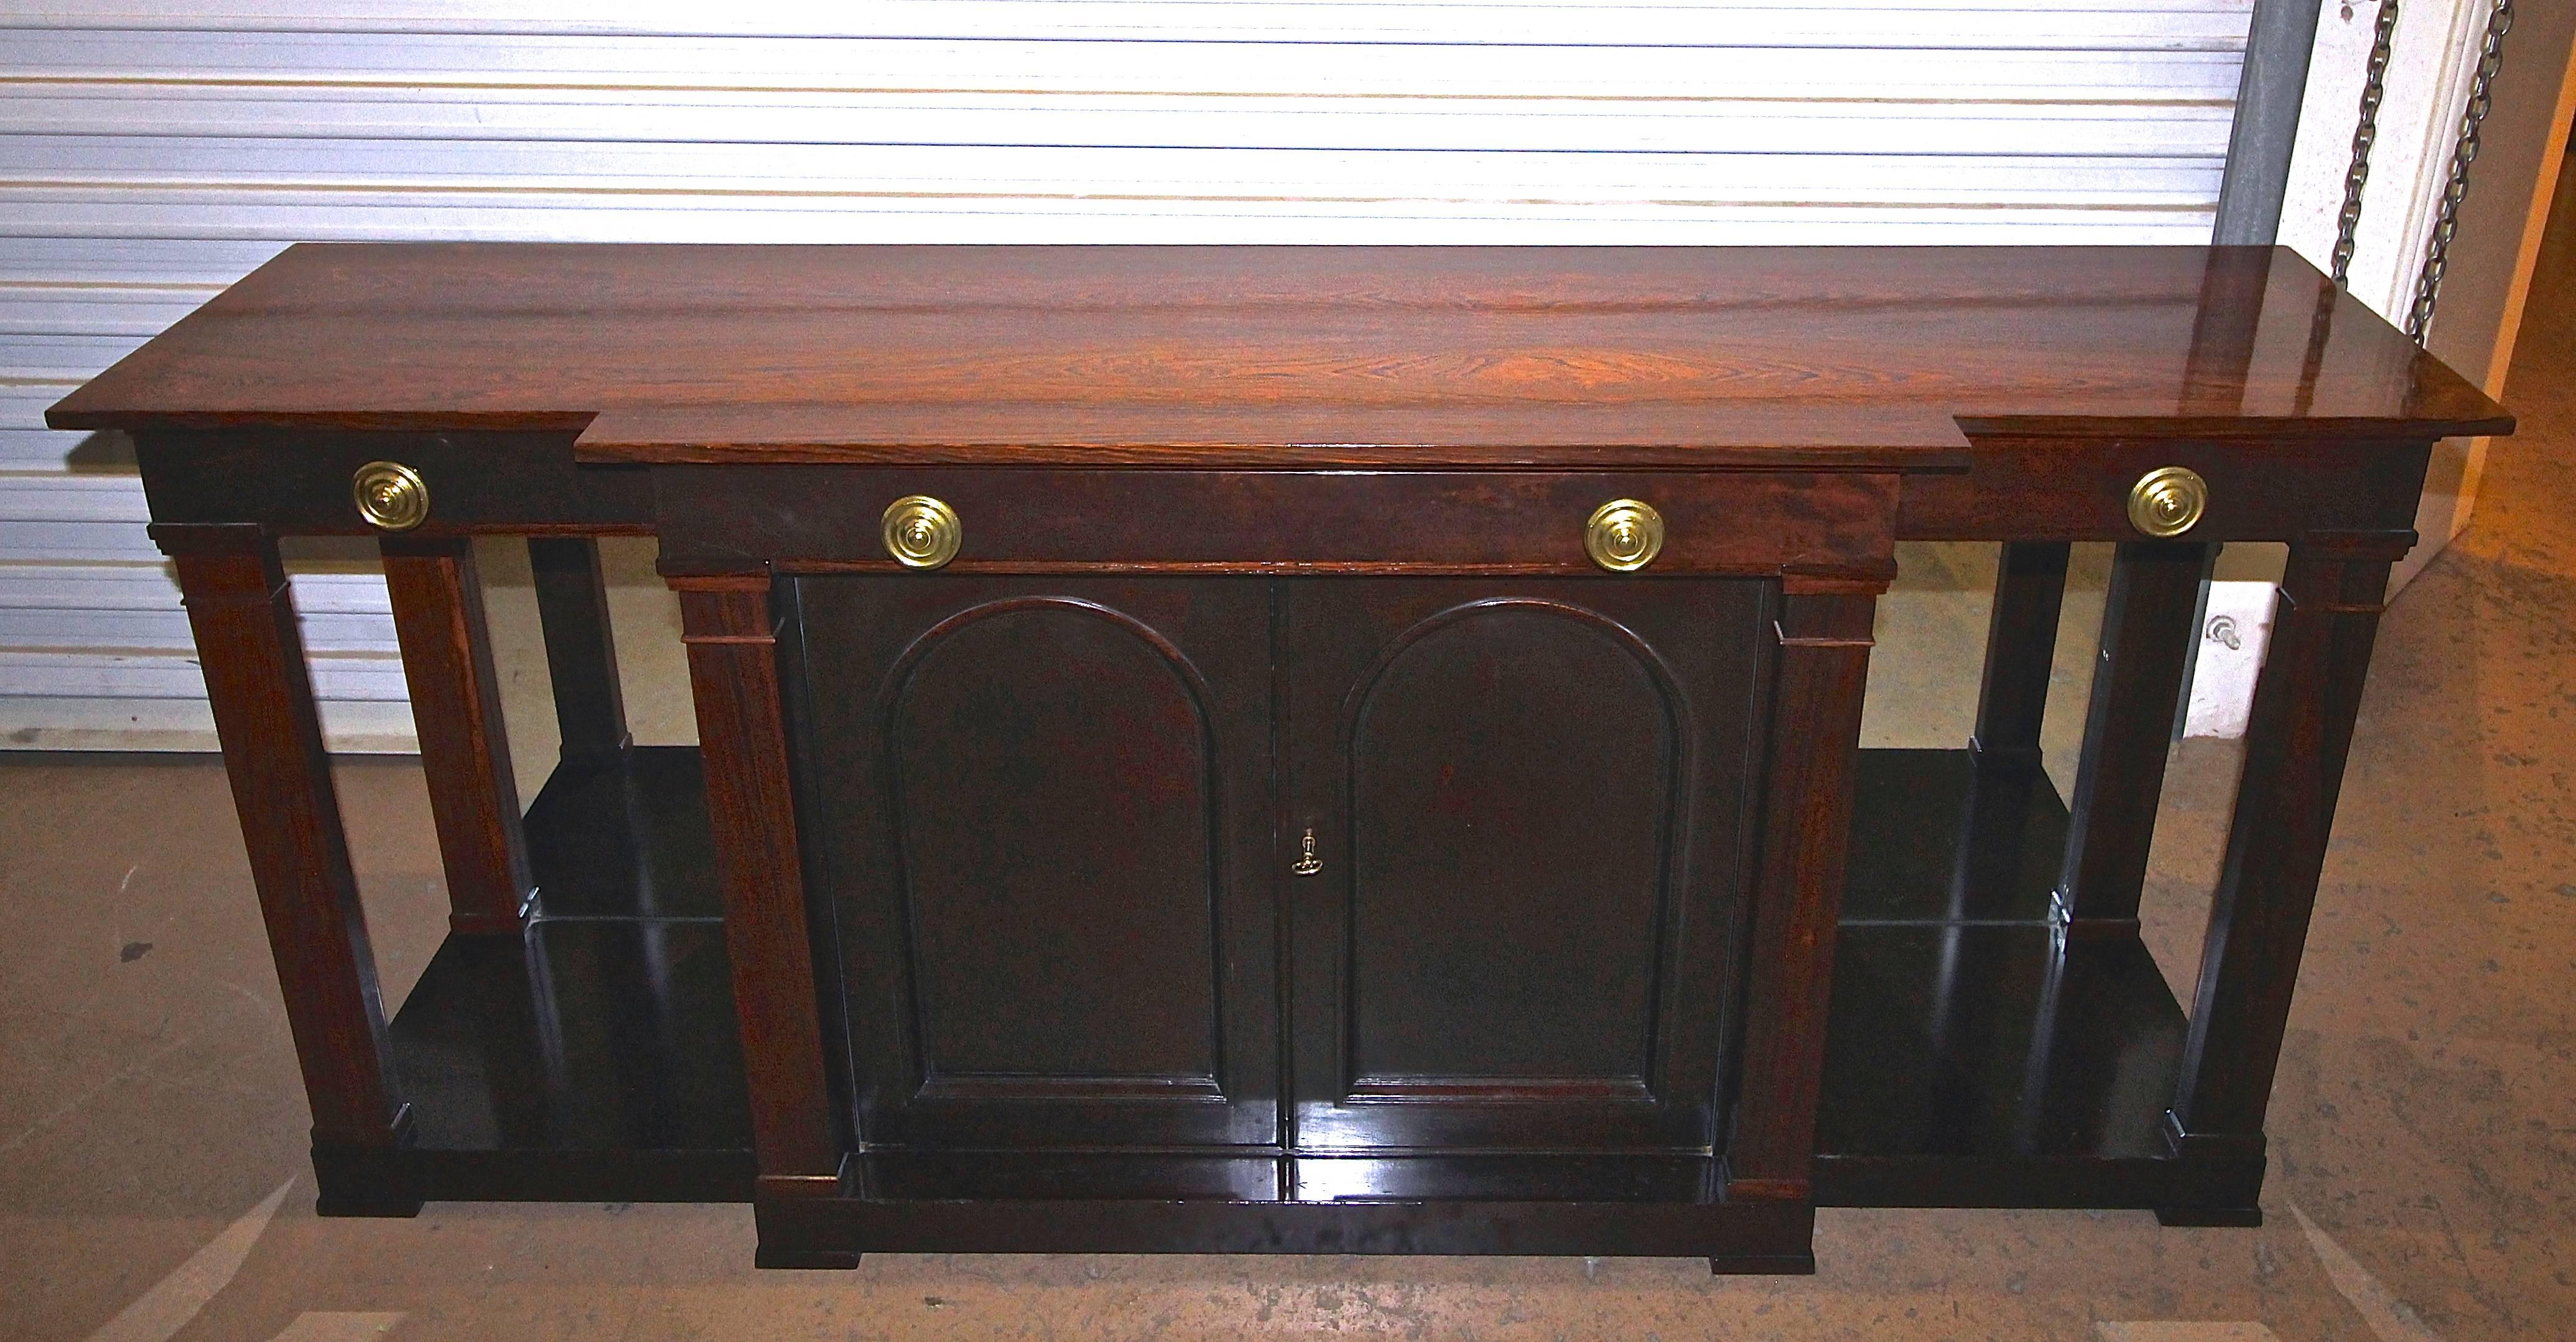 An exquisite and rare Dunbar sideboard or buffet designed by Edward Wormley (1907-1995) in rosewood and mahogany. This piece is reminiscent of the early designs of Wormley for Dunbar with a distinctive English Regency aesthetic. This breakfront has